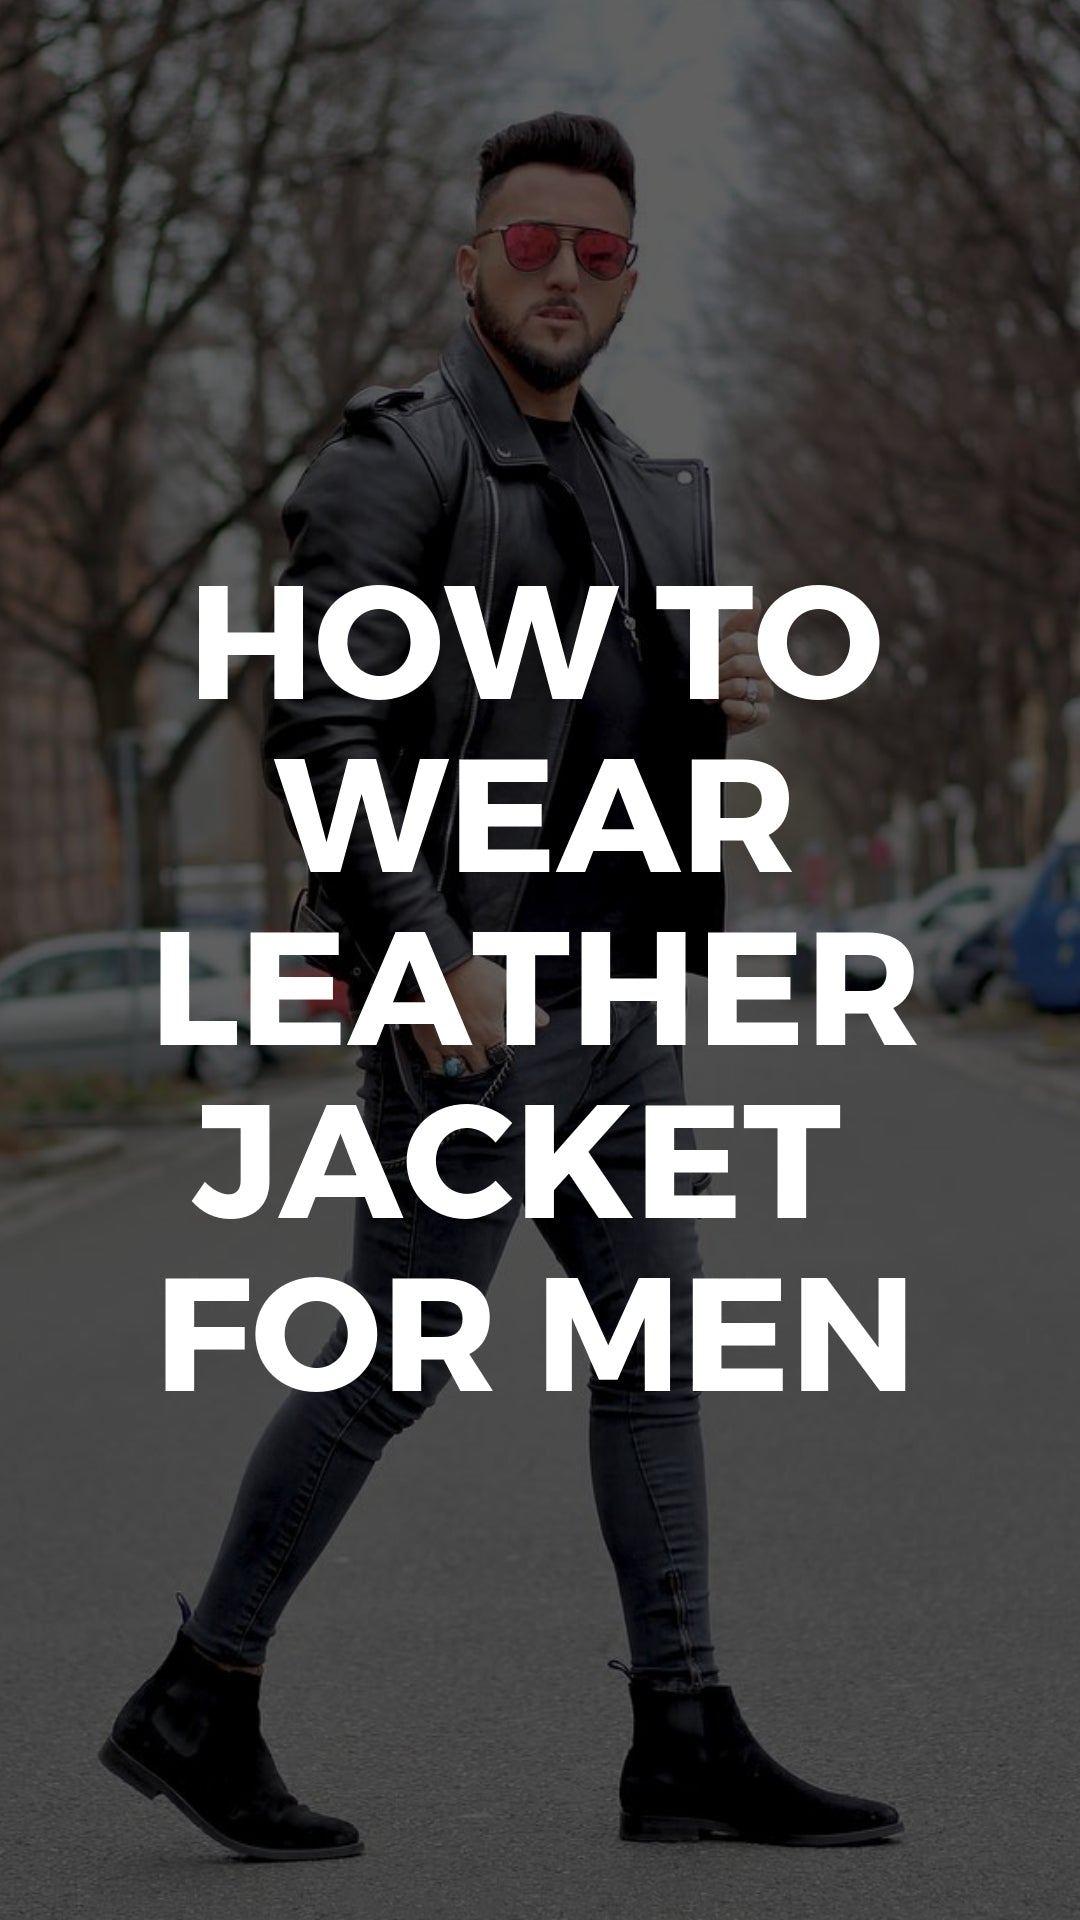 5 Leather Jacket Outfits You Haven't Seen Yet #leather #jacket #outfits #mens #fashion